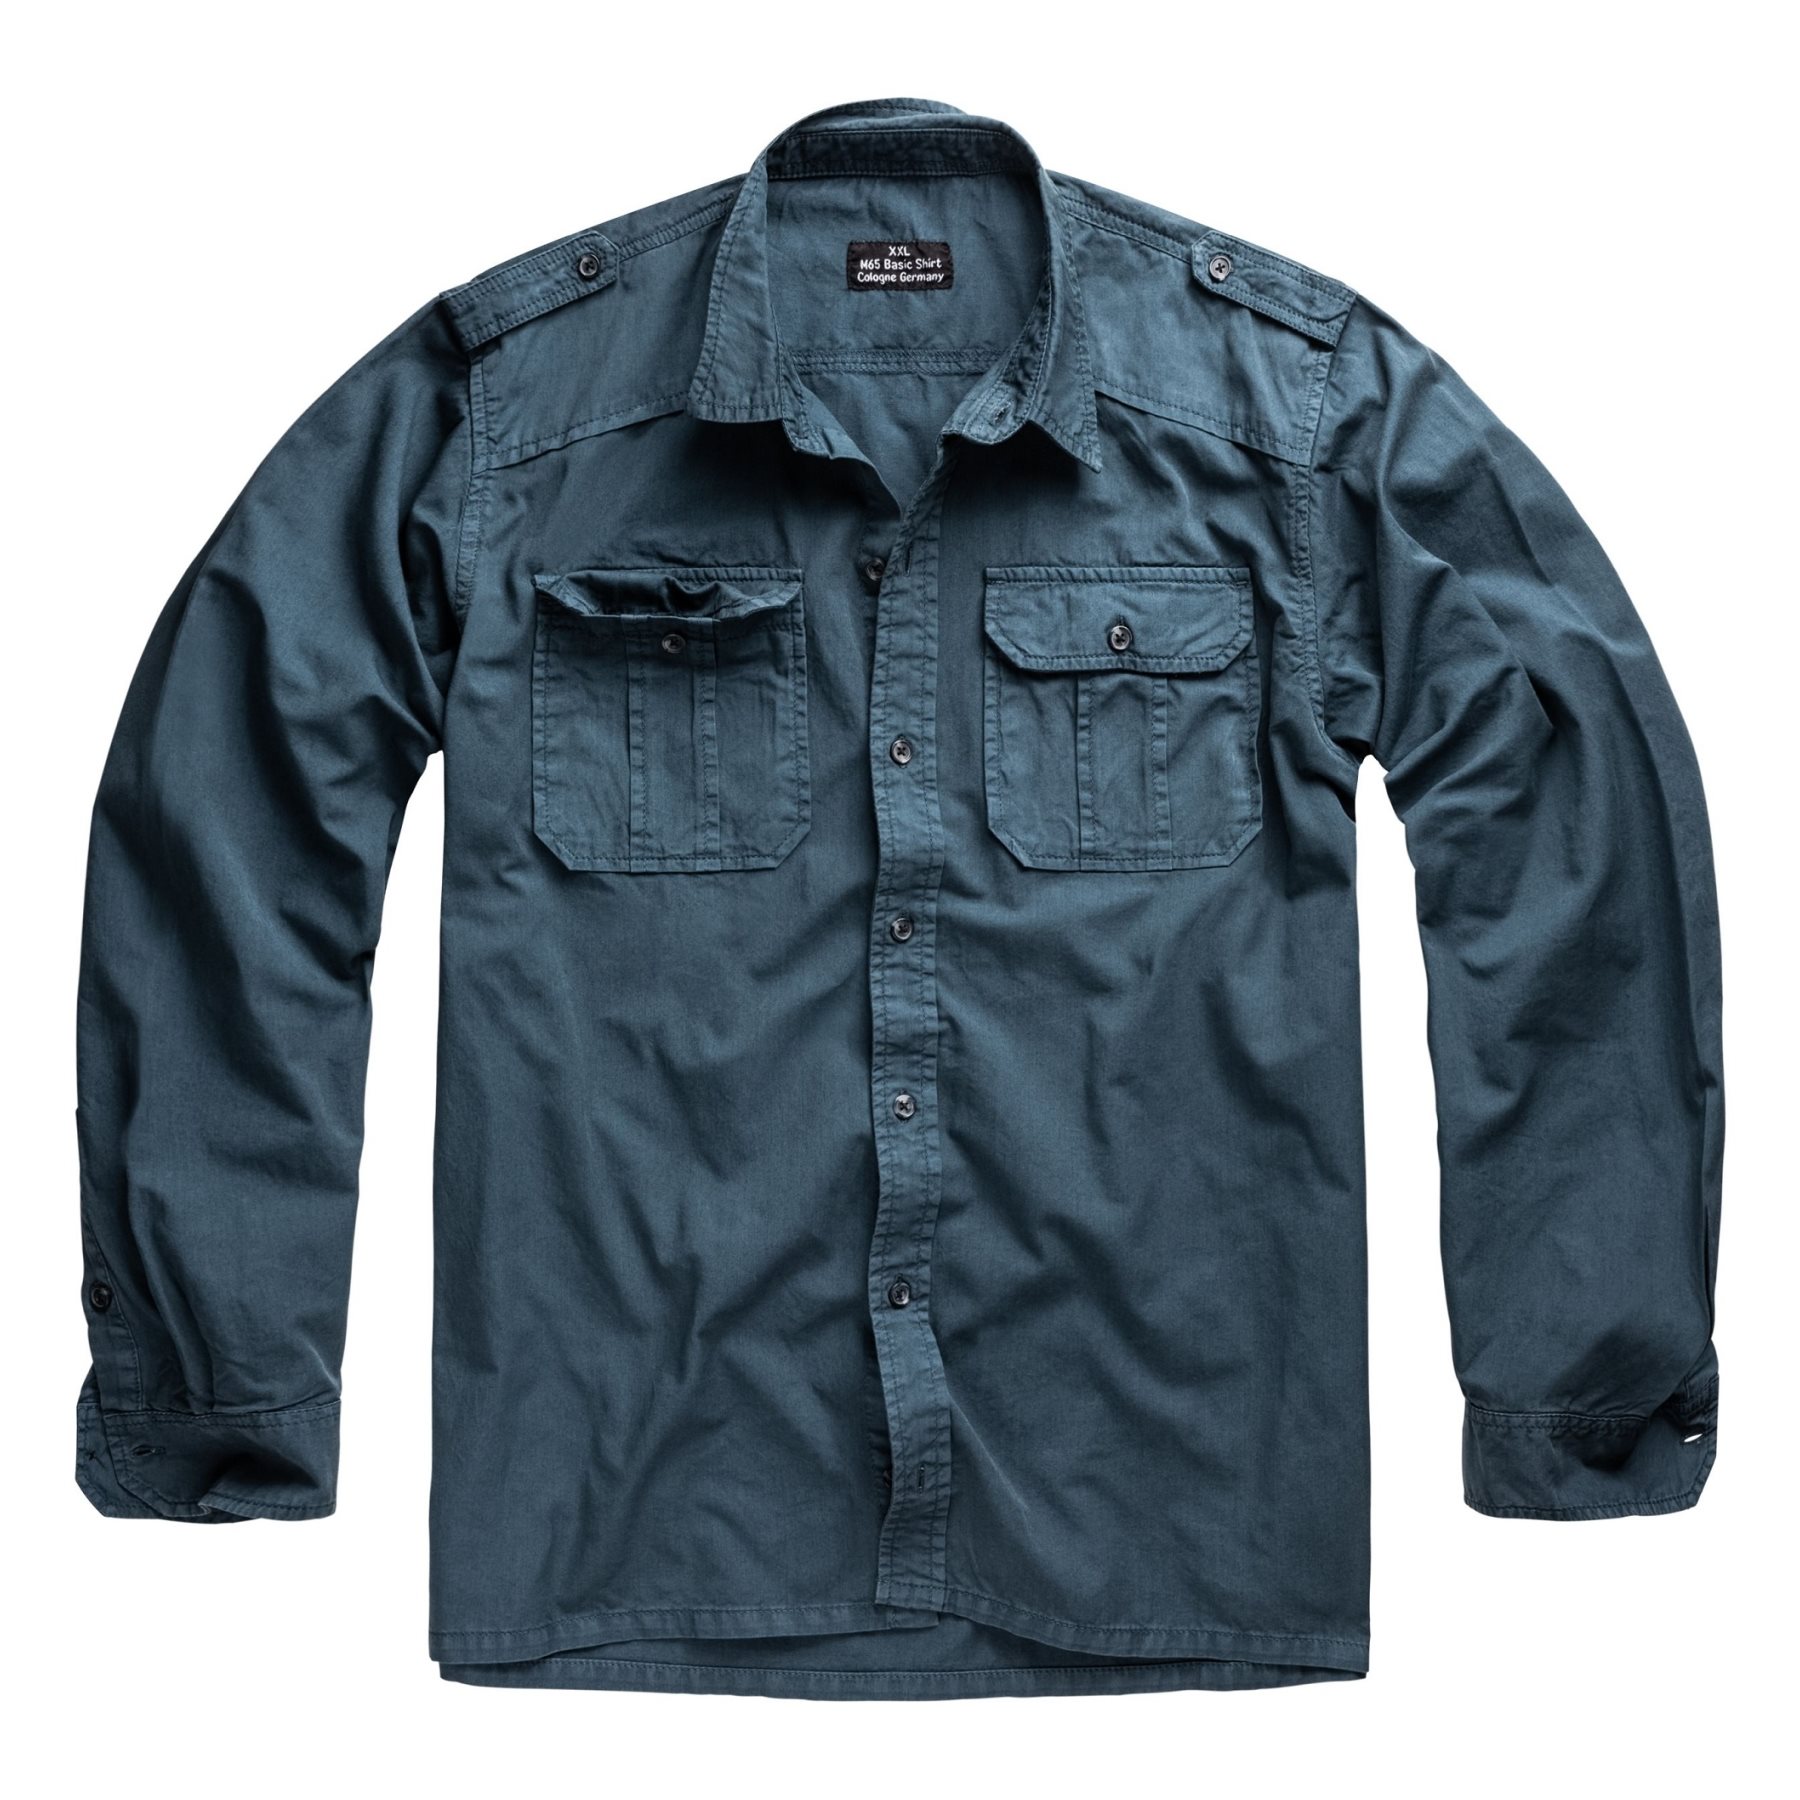 M65 BASIC shirt with long sleeves NAVY SURPLUS 06-3593-10 L-11